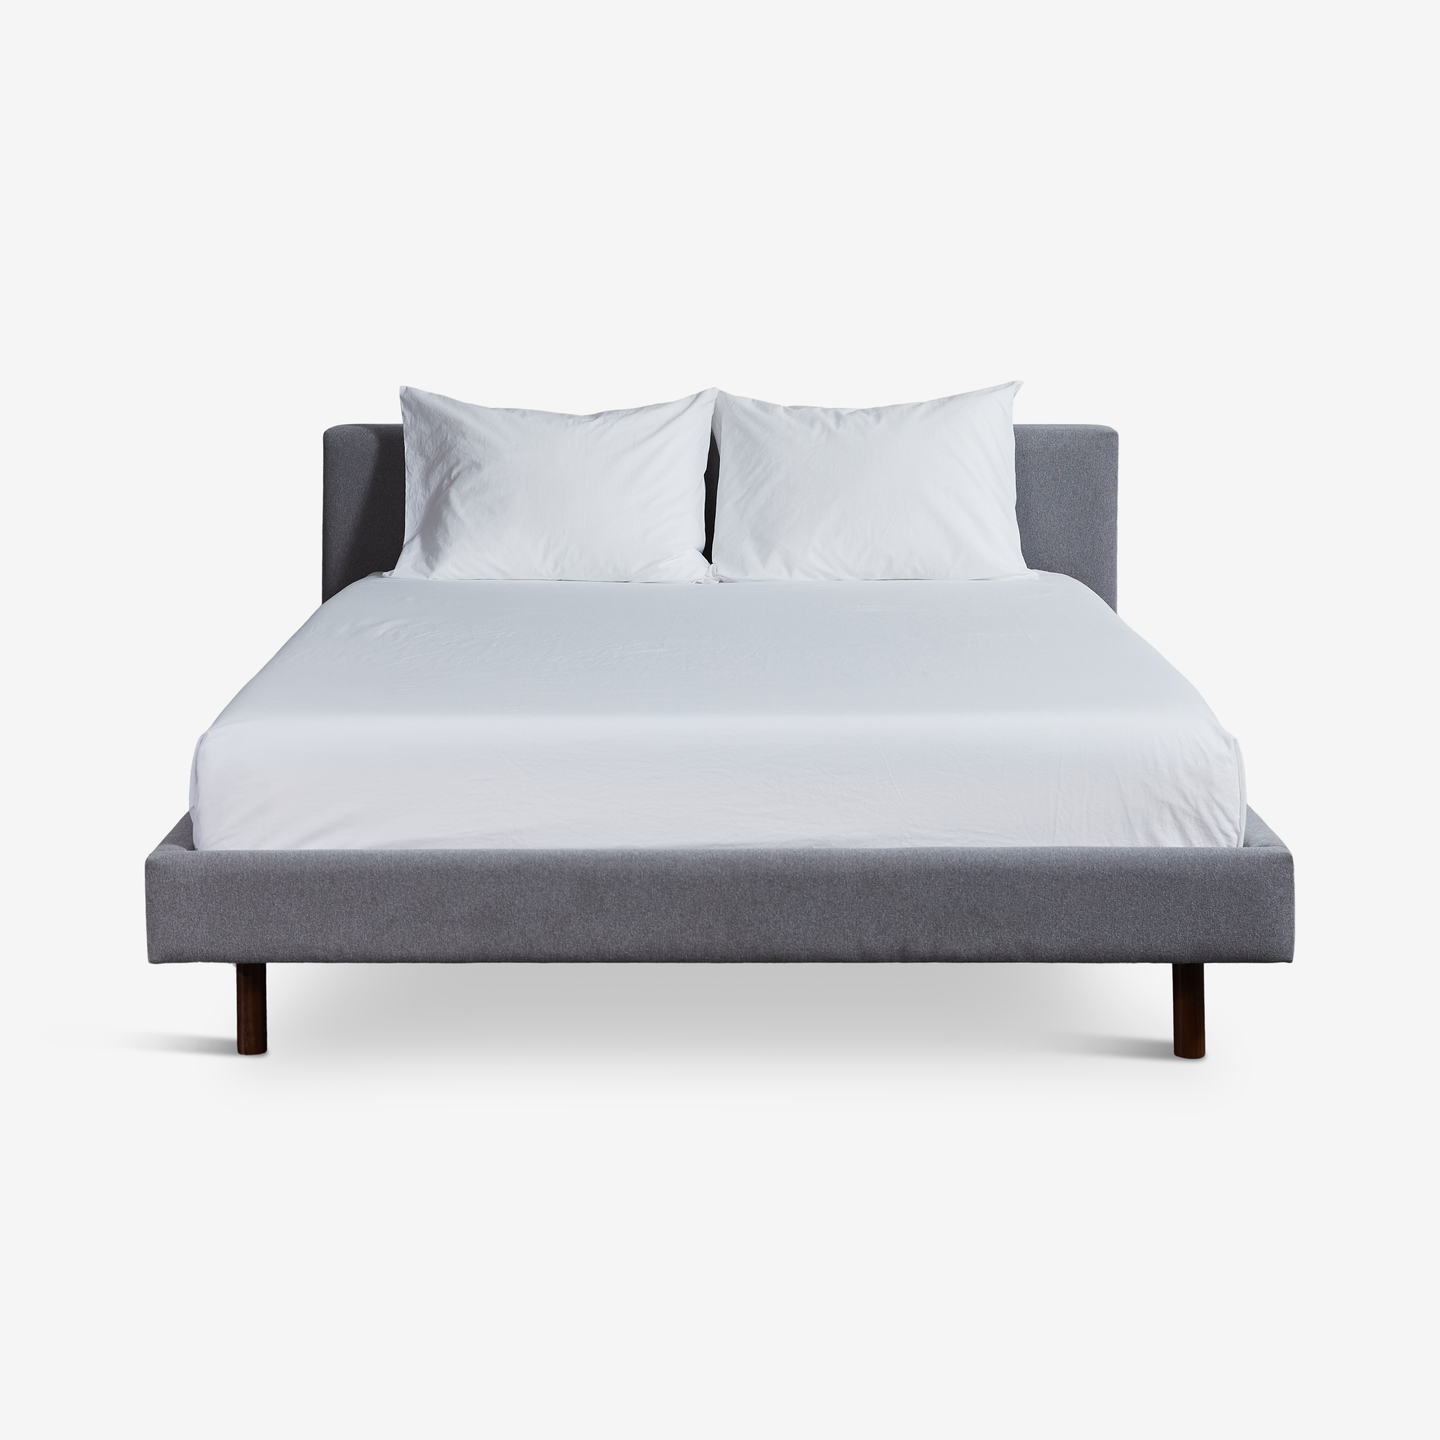 762_Mila-Silver-Bento-Bed-King_Flat-Frontbed-made-No-Duvet (2020)